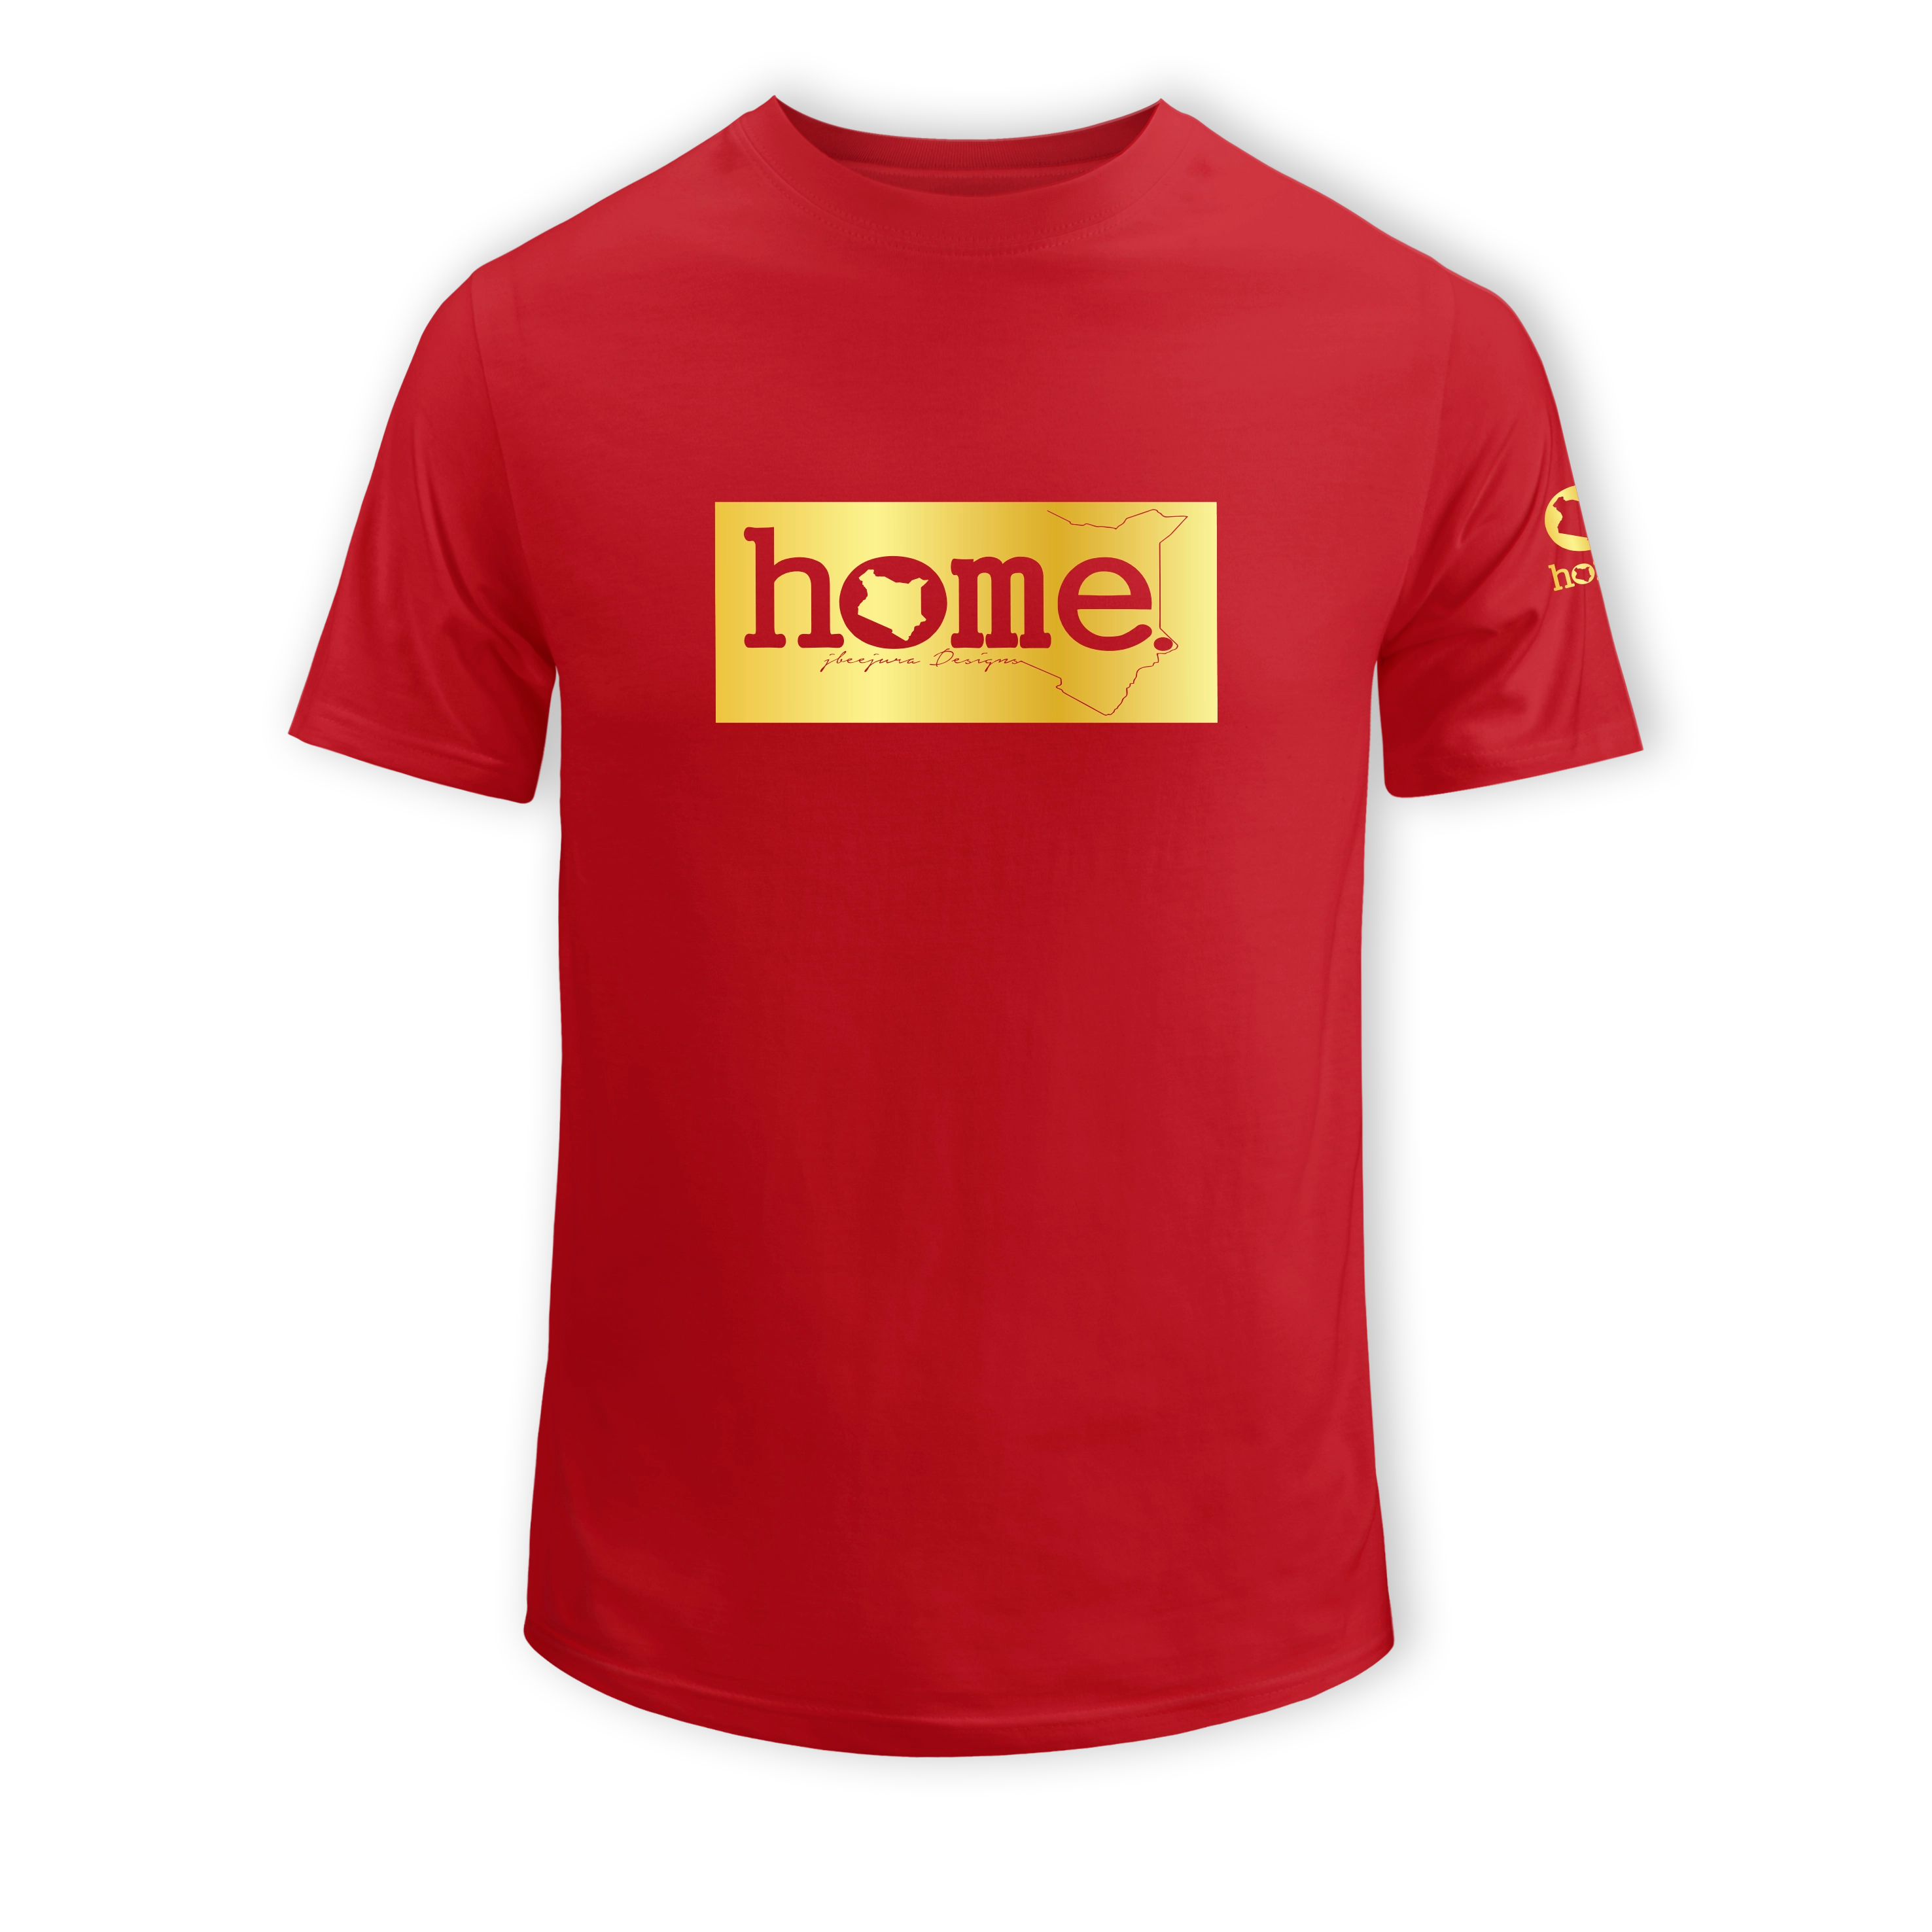 home_254 SHORT-SLEEVED RED T-SHIRT WITH A GOLD CLASSIC PRINT – COTTON PLUS FABRIC